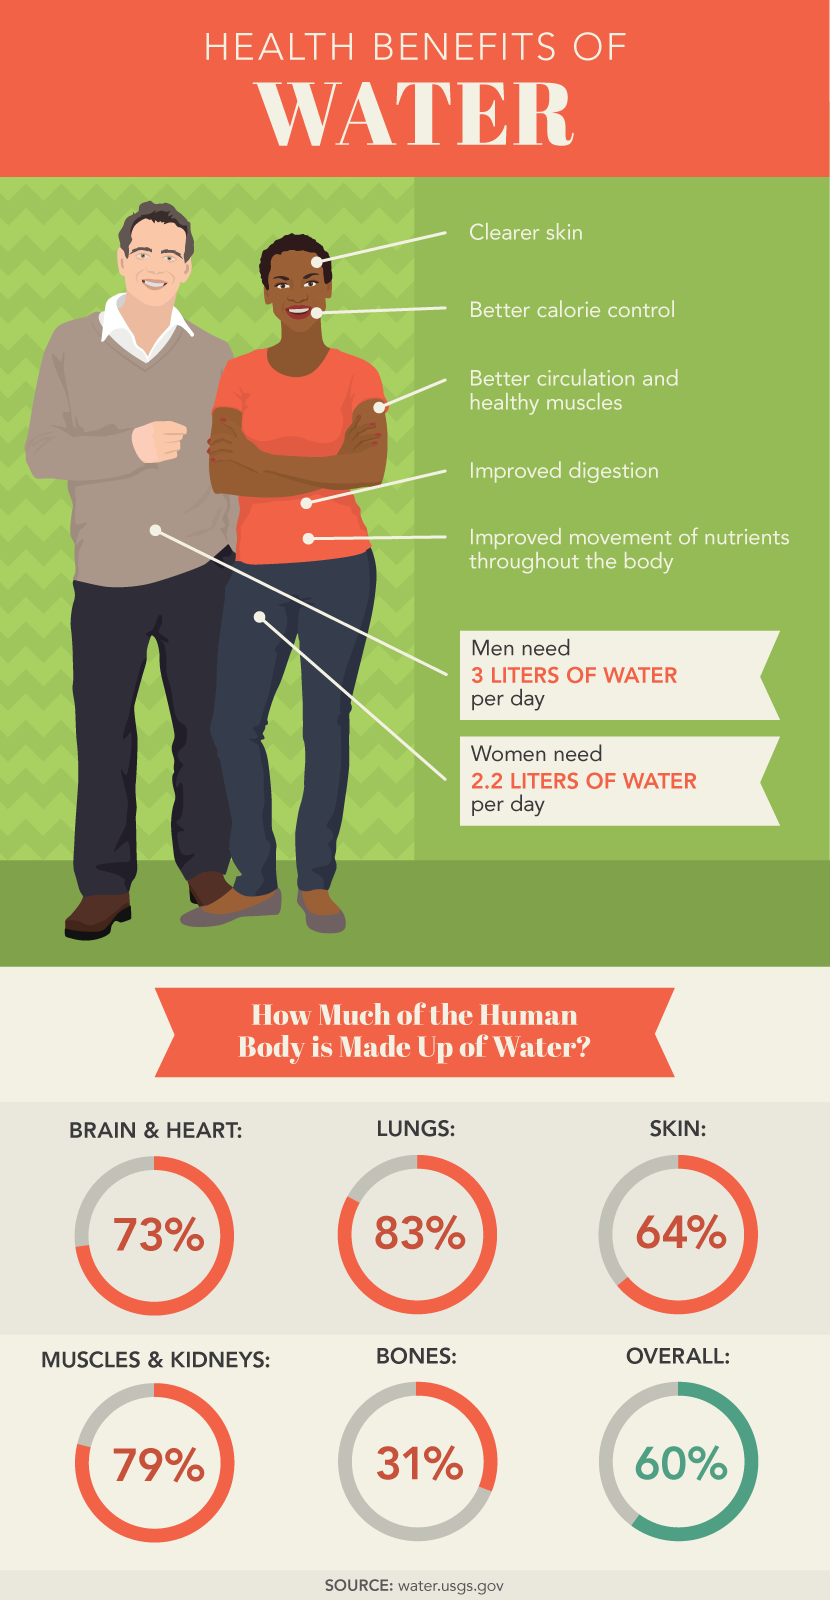 Stay Hydrated With Infused Water: The importance of water in the human body